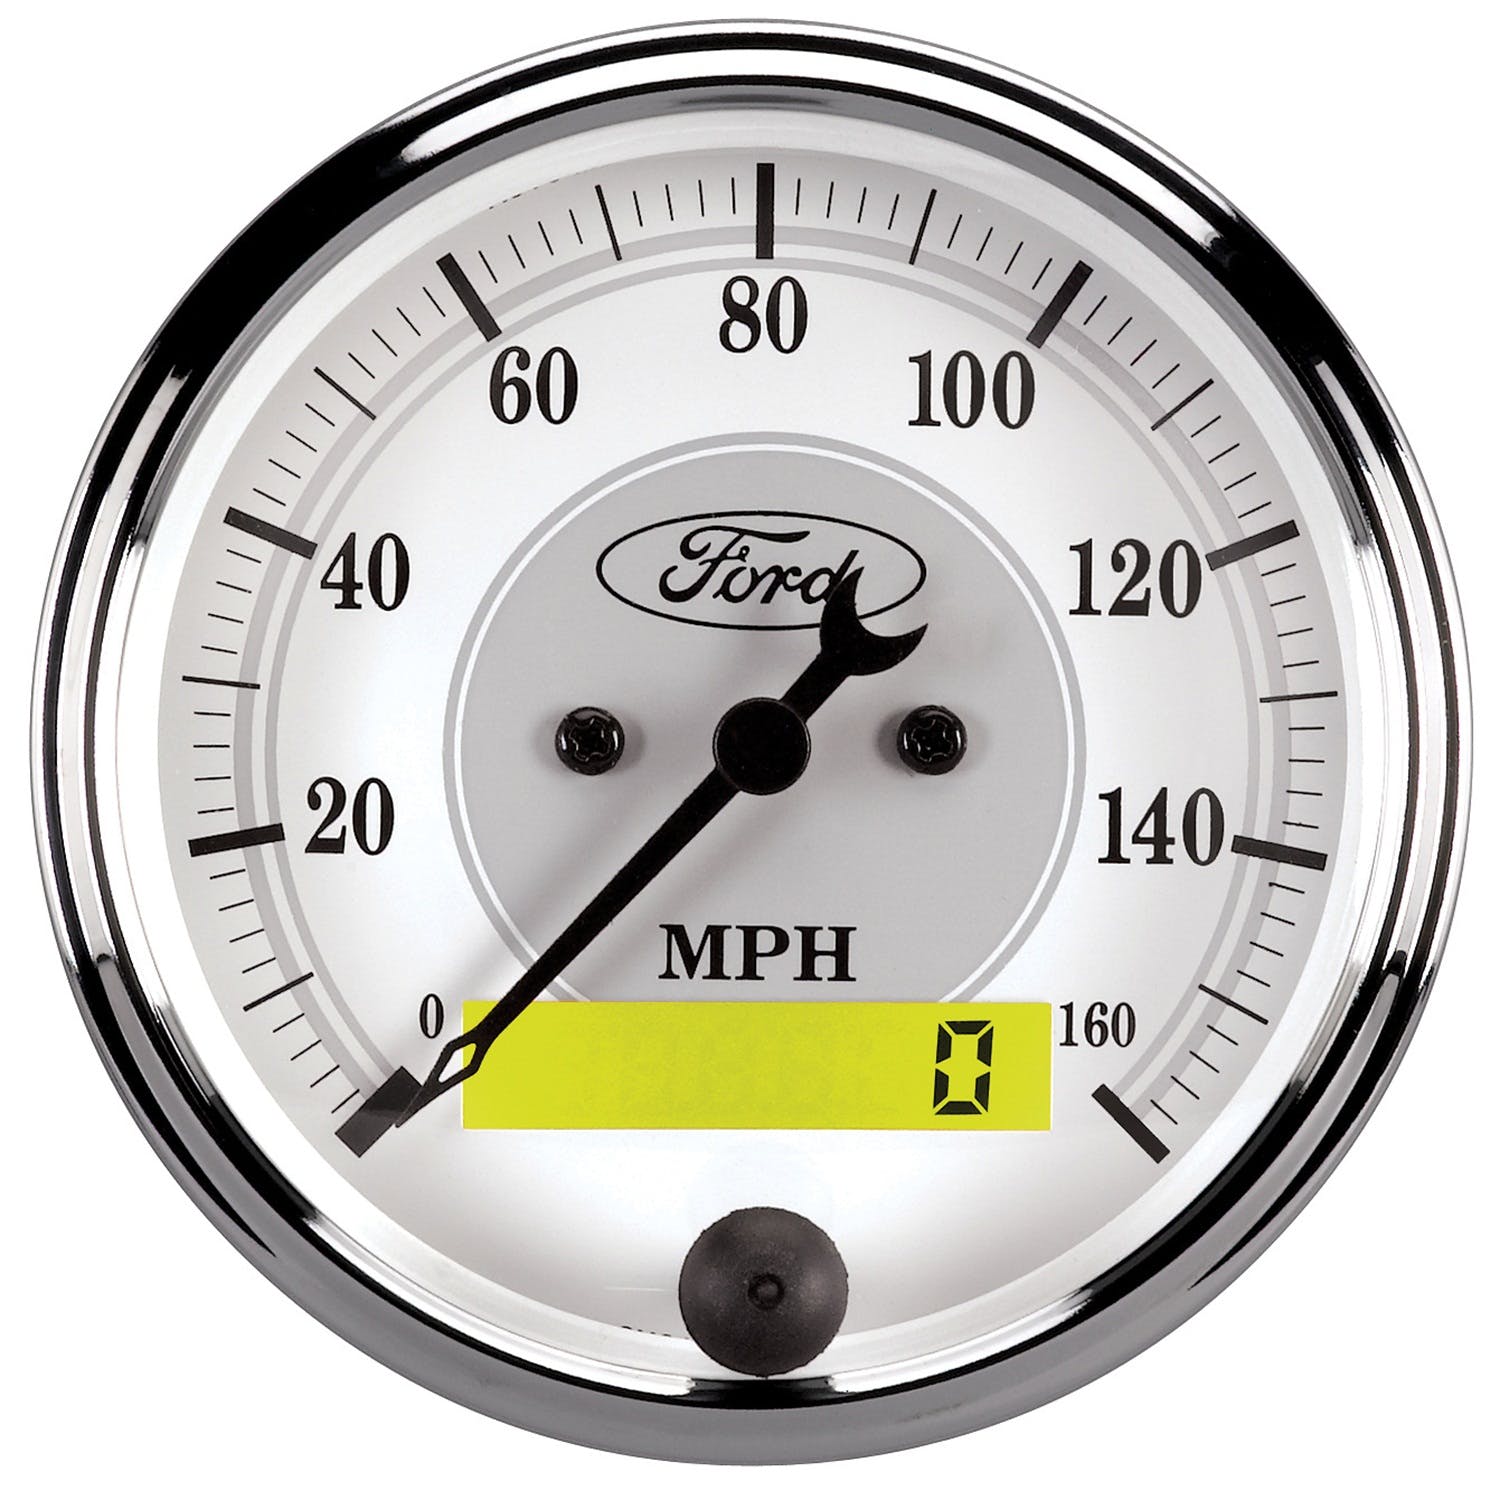 AutoMeter Products 880355 3-1/8 Speedo, 120 MPH, Electric, Ford Masterpiece